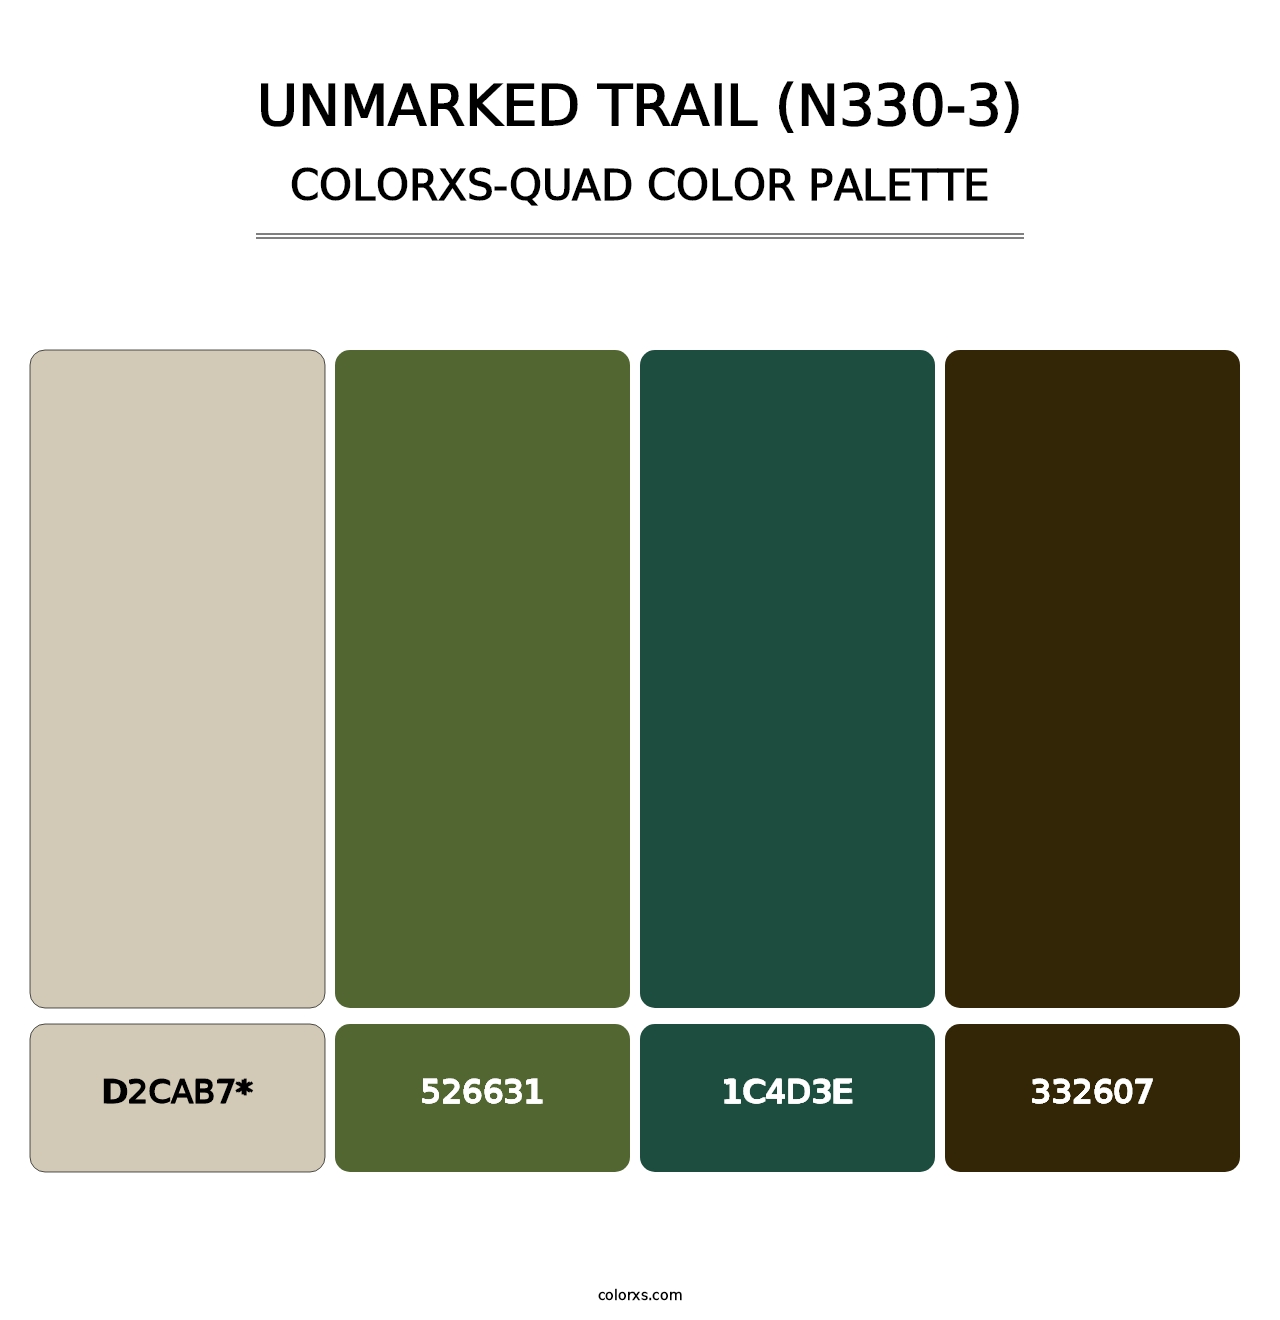 Unmarked Trail (N330-3) - Colorxs Quad Palette